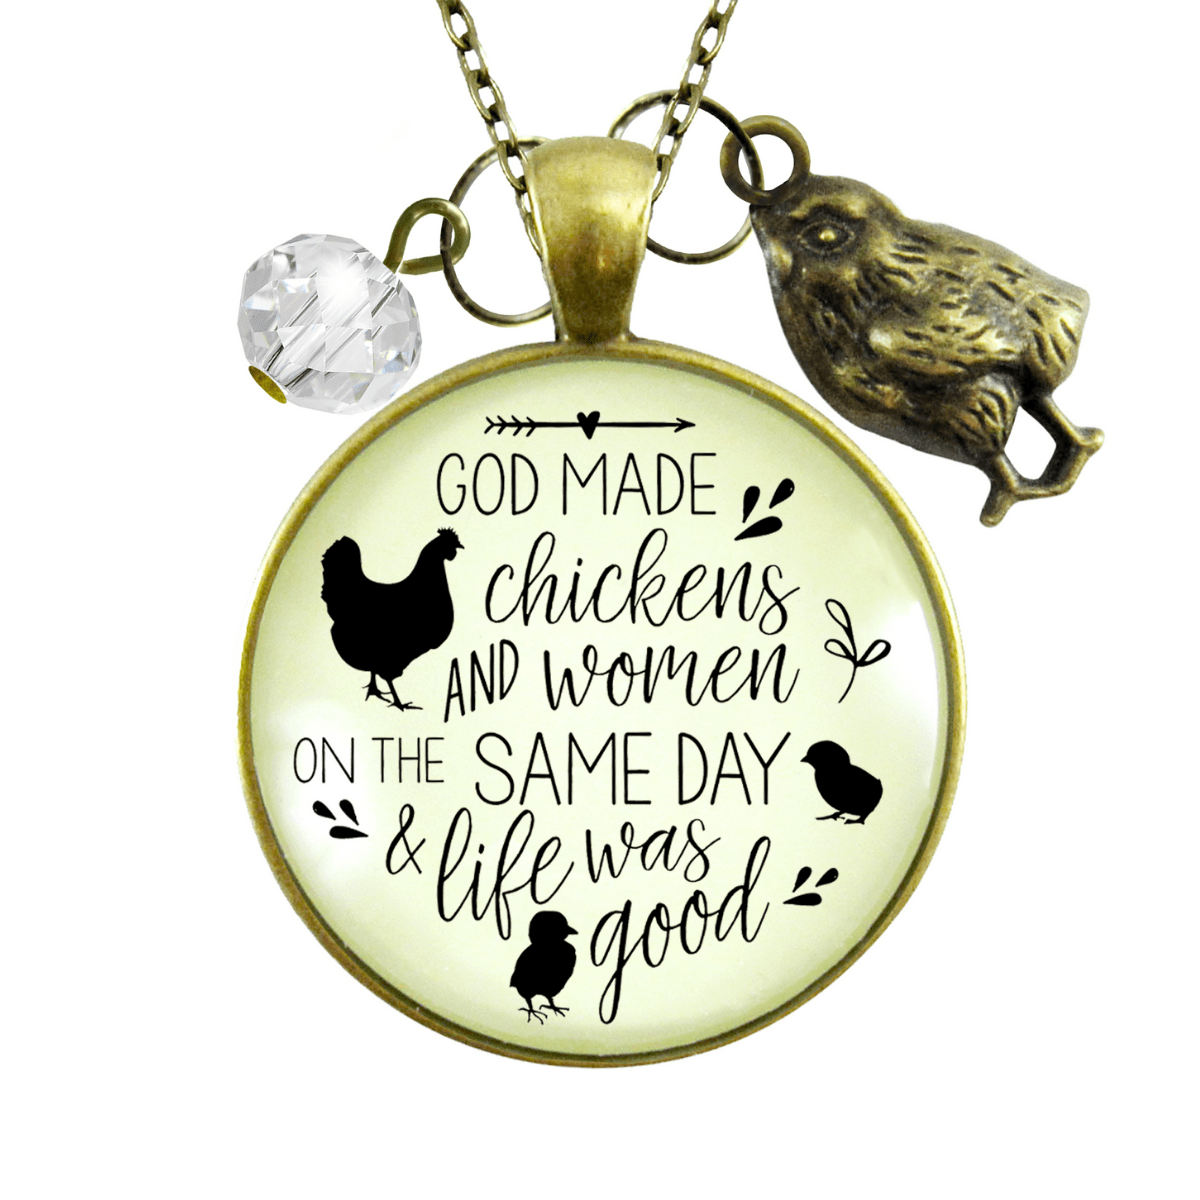 Gutsy Goodness Chicken Necklace Funny God Made Chickens and Women It Was Good - Gutsy Goodness Handmade Jewelry;Chicken Necklace Funny God Made Chickens And Women It Was Good - Gutsy Goodness Handmade Jewelry Gifts